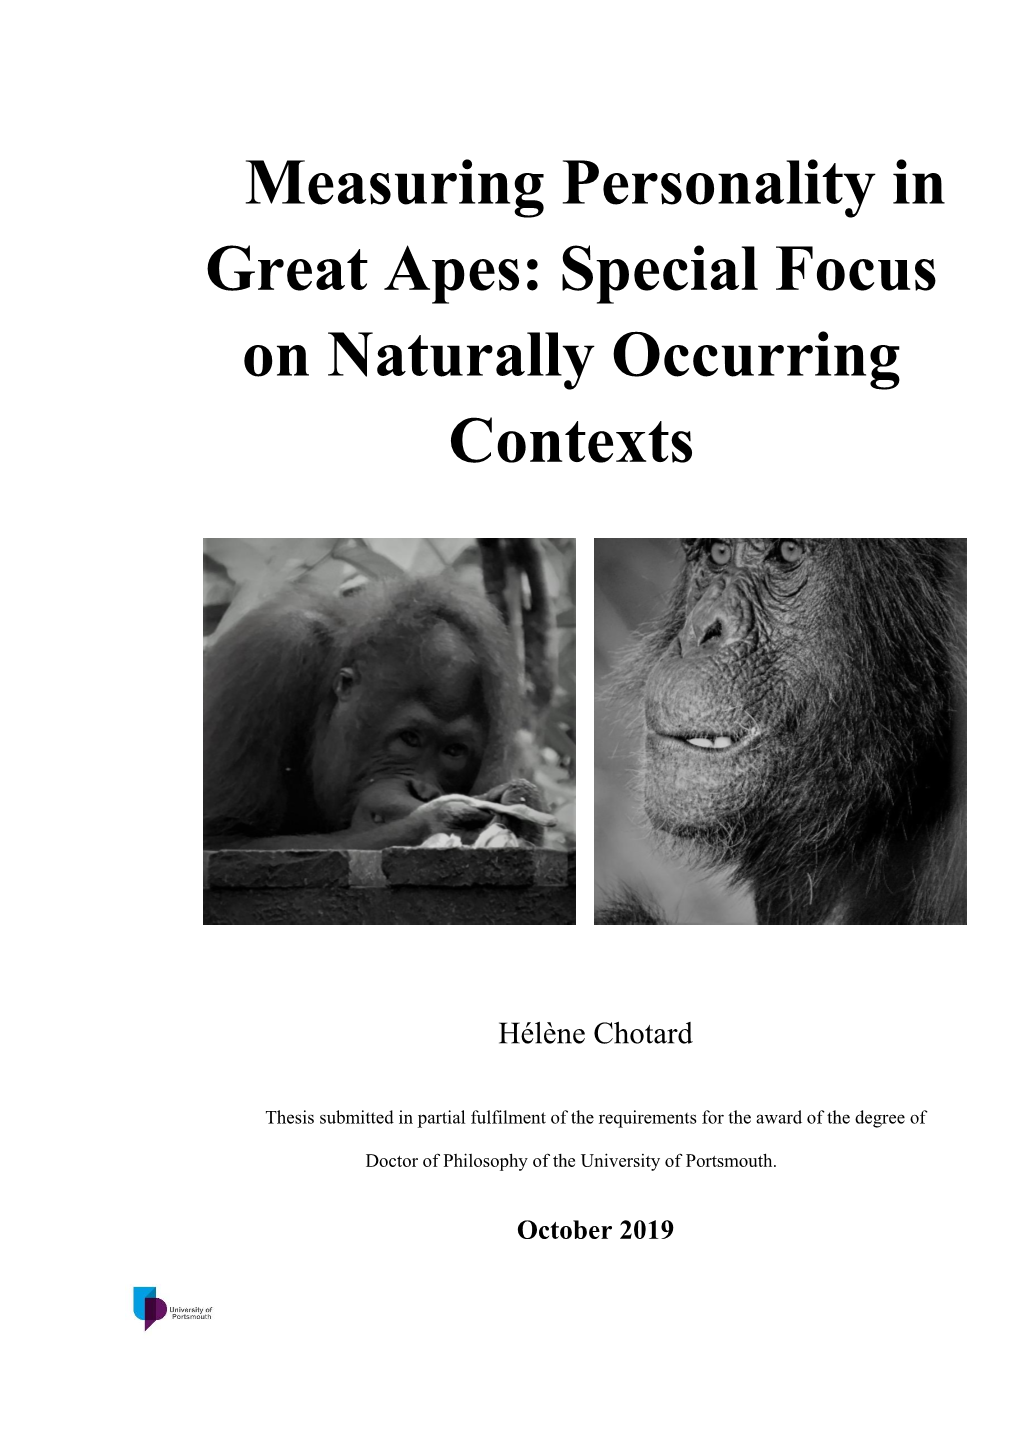 Measuring Personality in Great Apes: Special Focus on Naturally Occurring Contexts